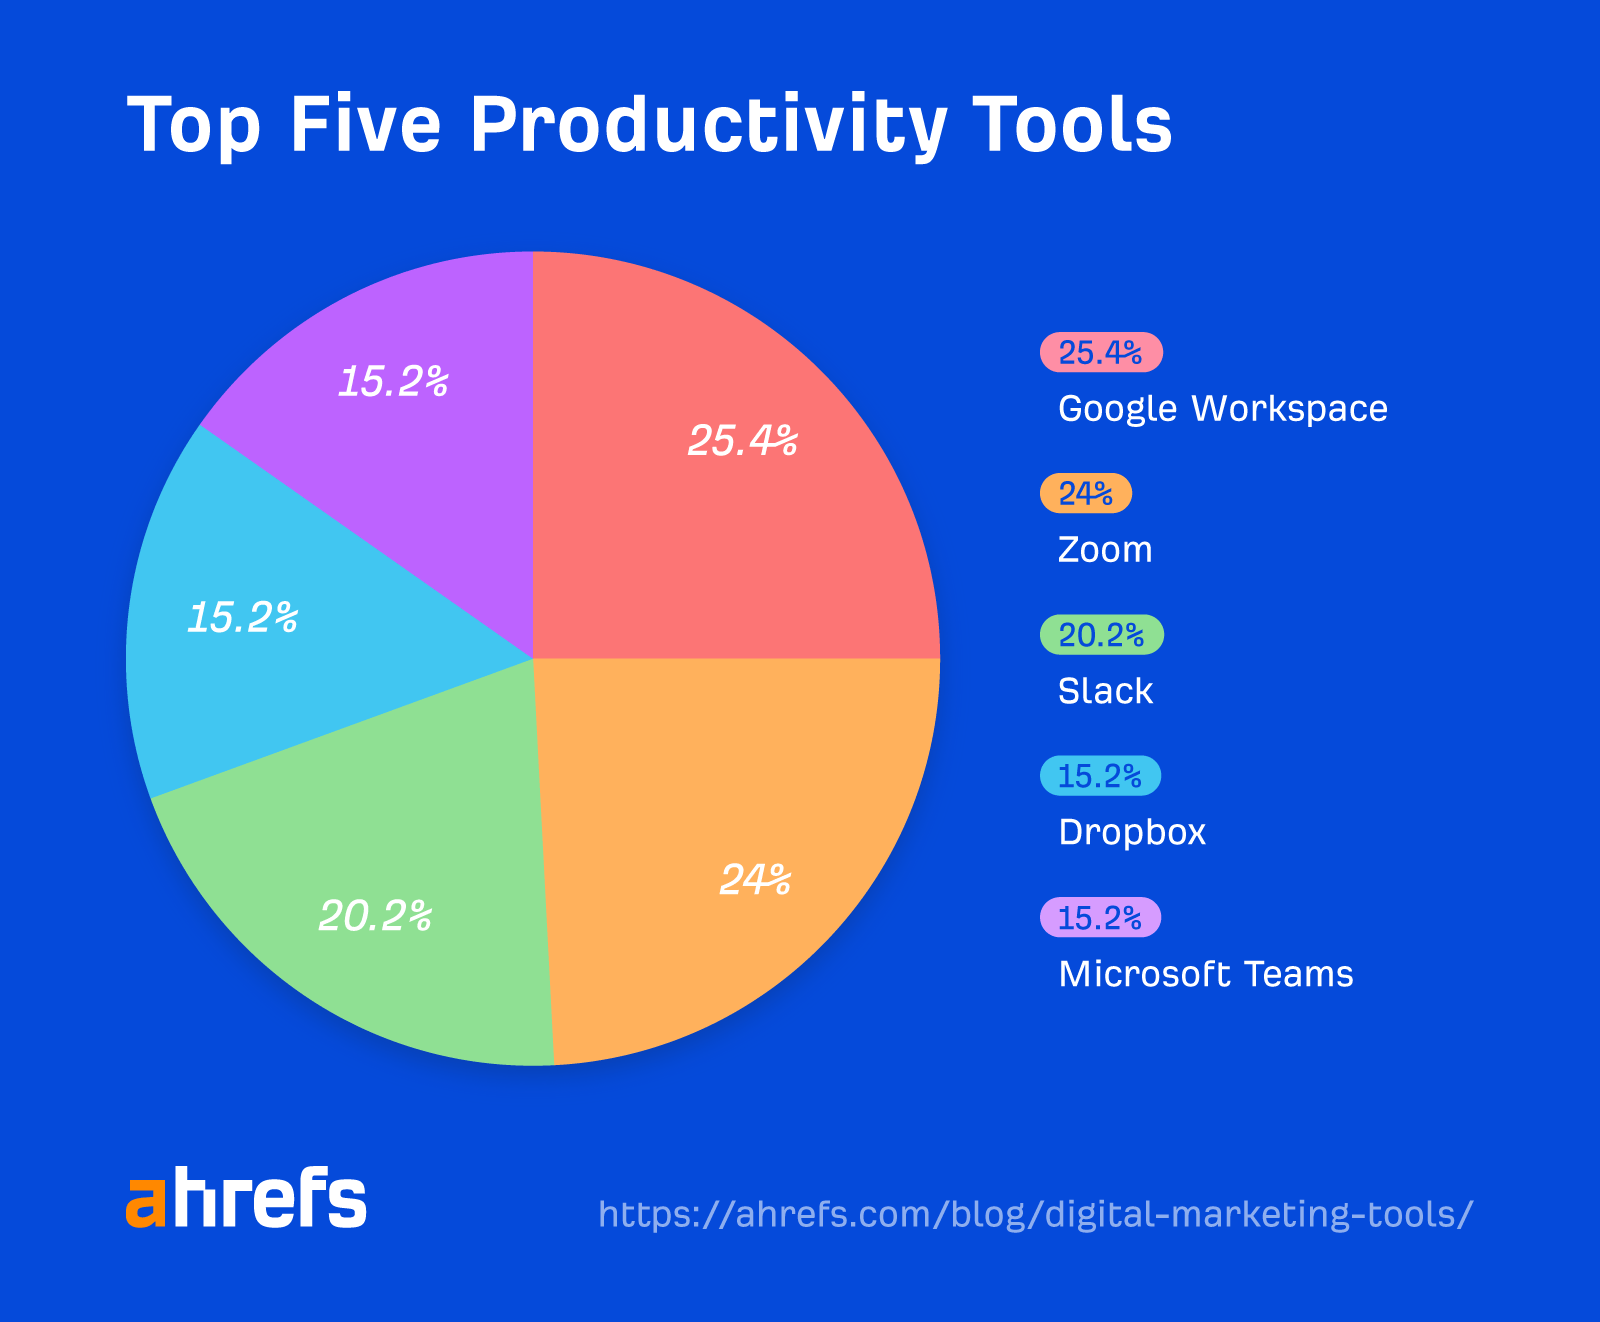 Pie chart showing percentage breakdown of top five productivity tools
